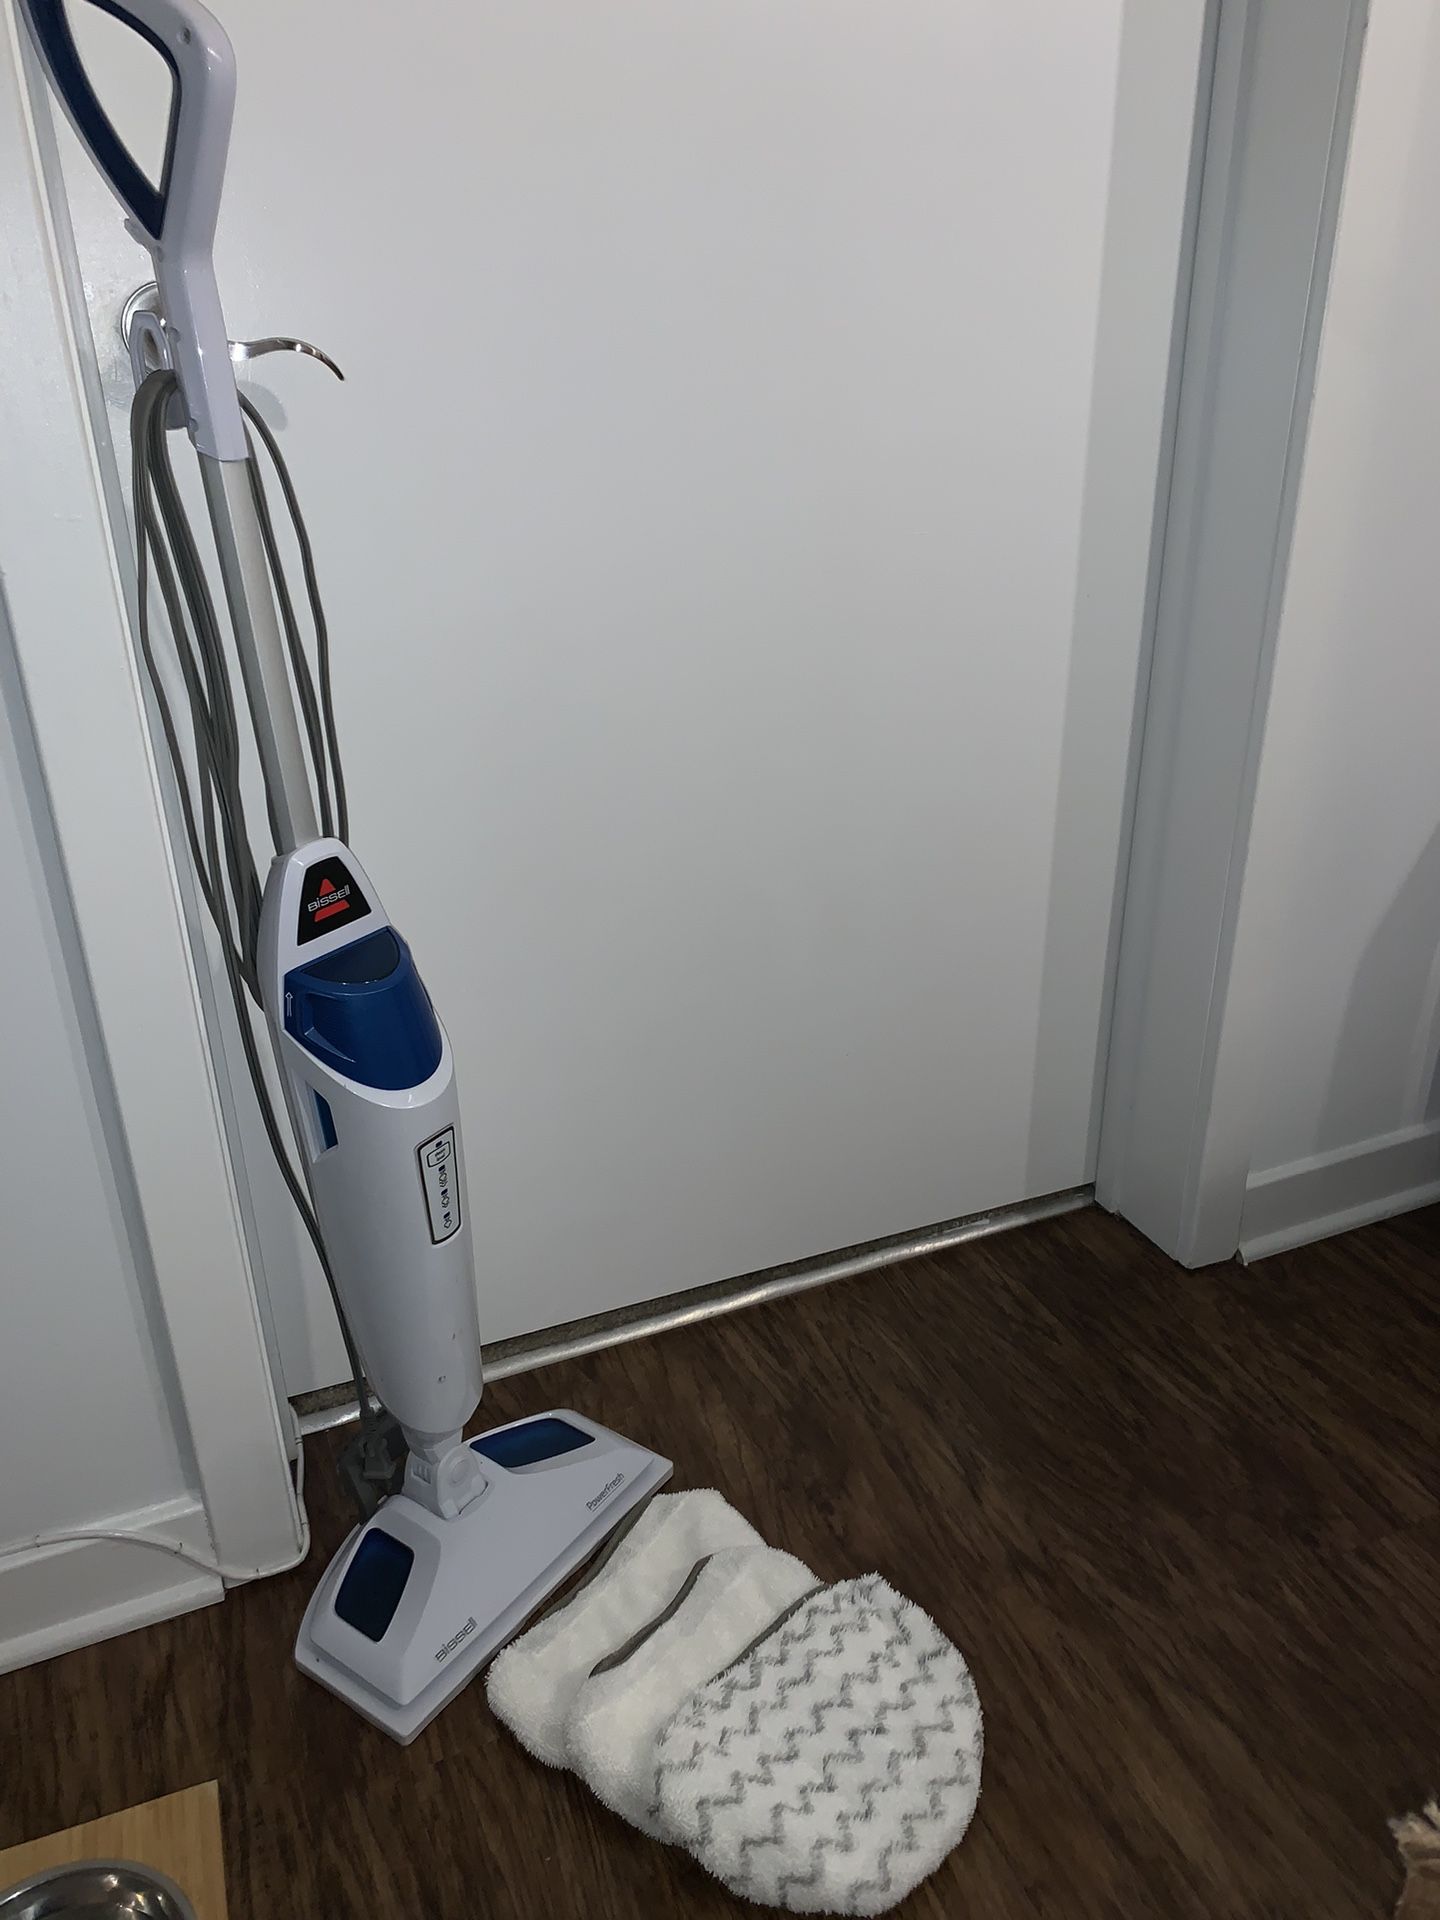 Like New - Bissell Scrubbing & Sanitizing Steam Mop 